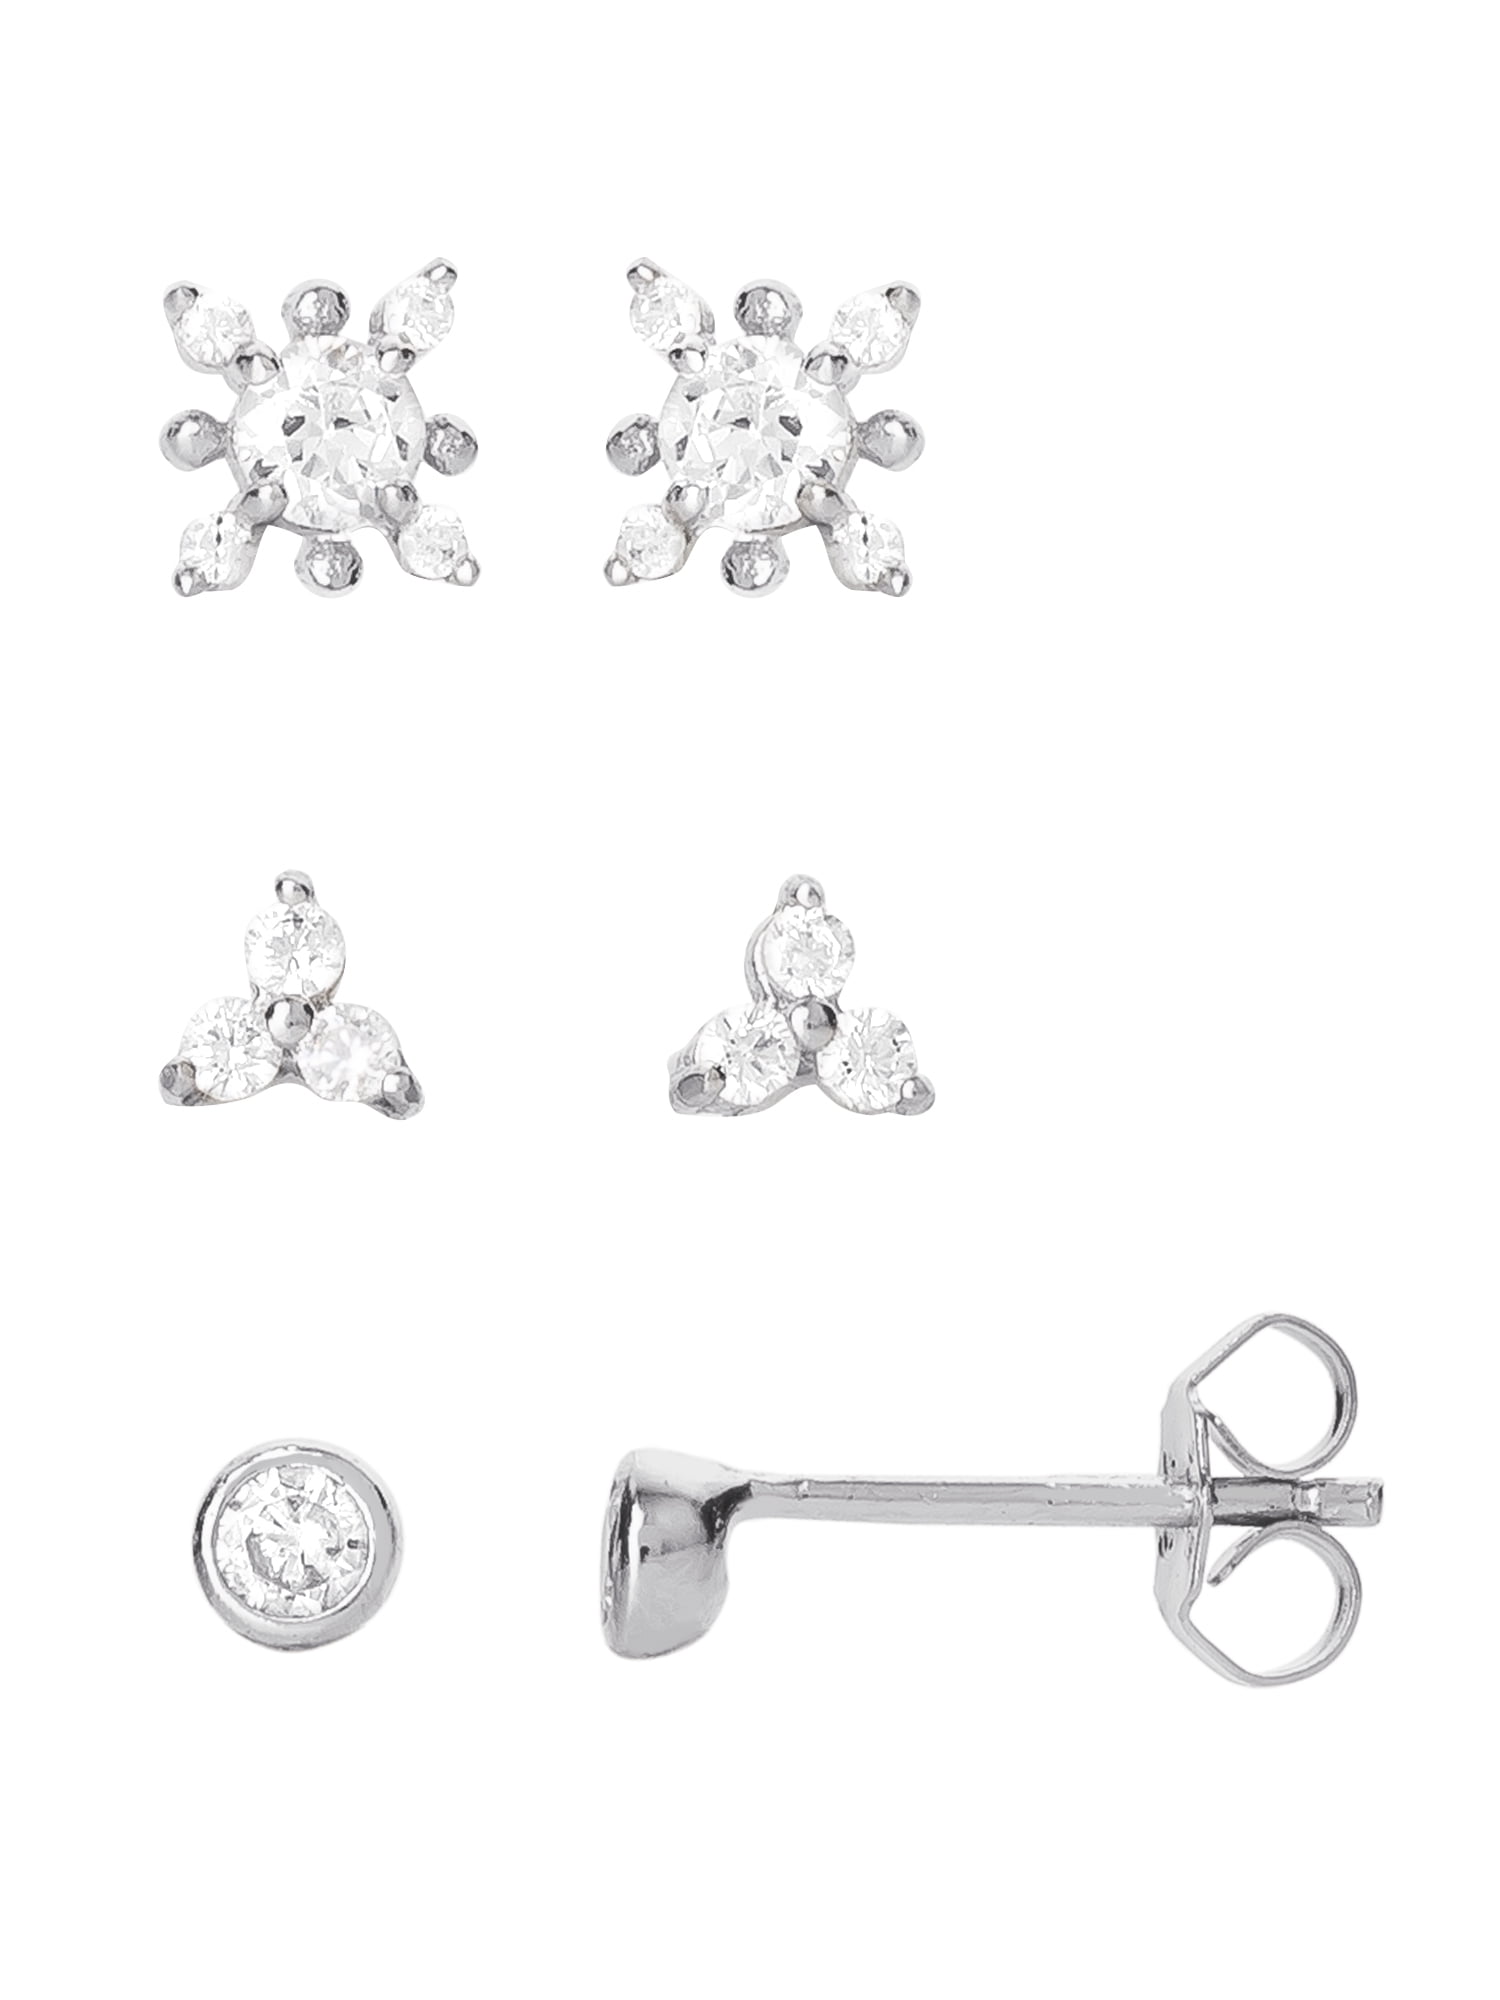 Set of 24 Pairs of Stud Earrings set Cubic Zirconia Earrings for Girls Women Men ，Silver and Gold 